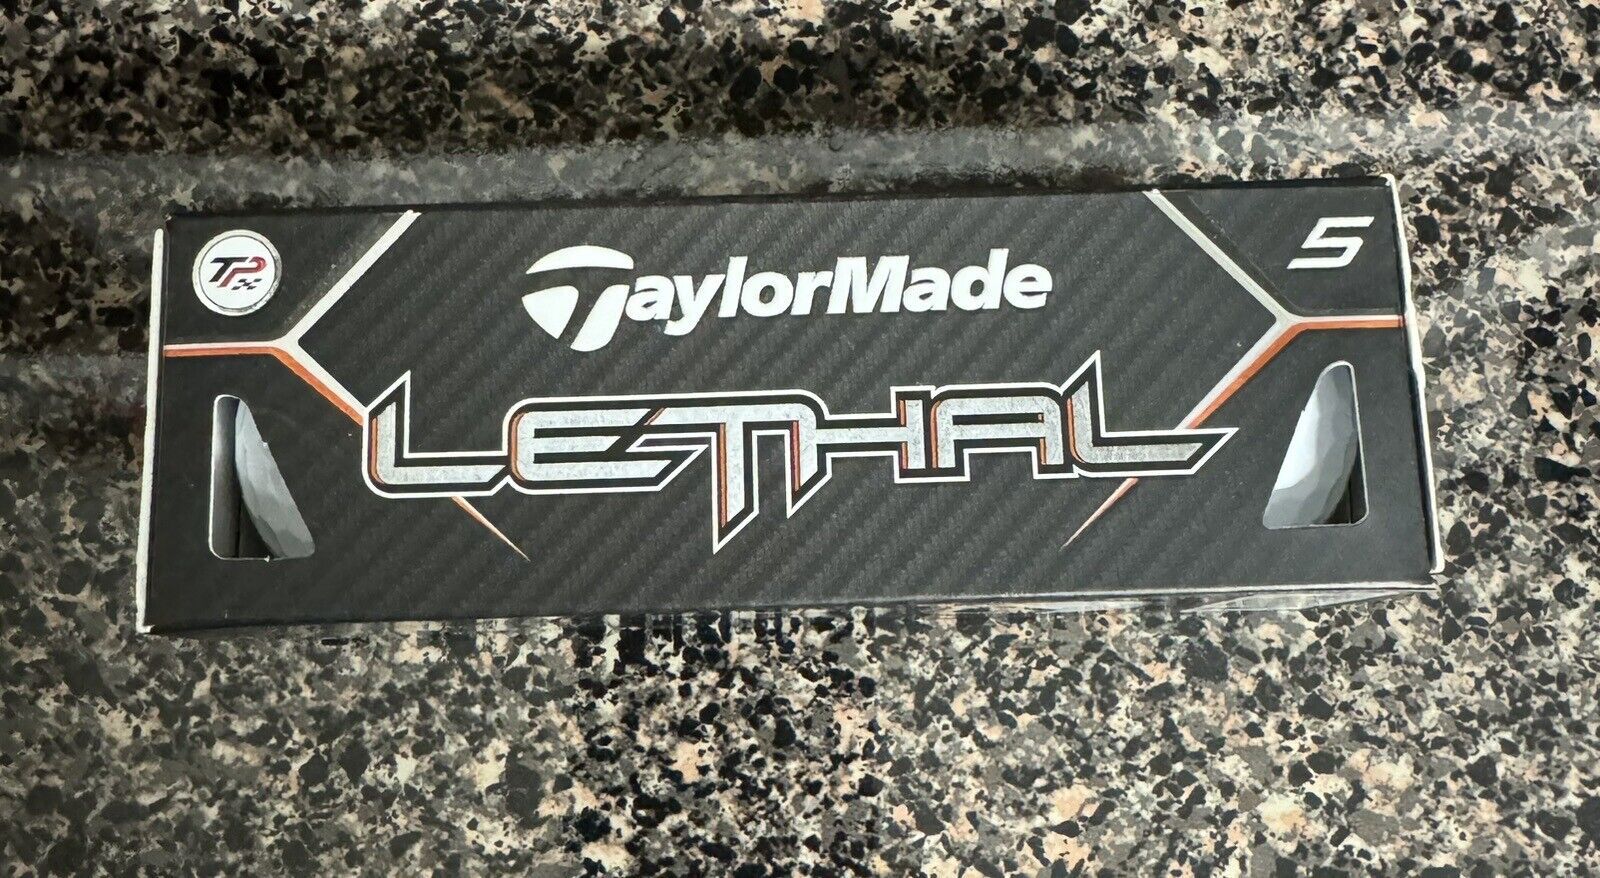 NEW TaylorMade LETHAL TP Golf Balls 1 Sleeve 3 New In Box Balls